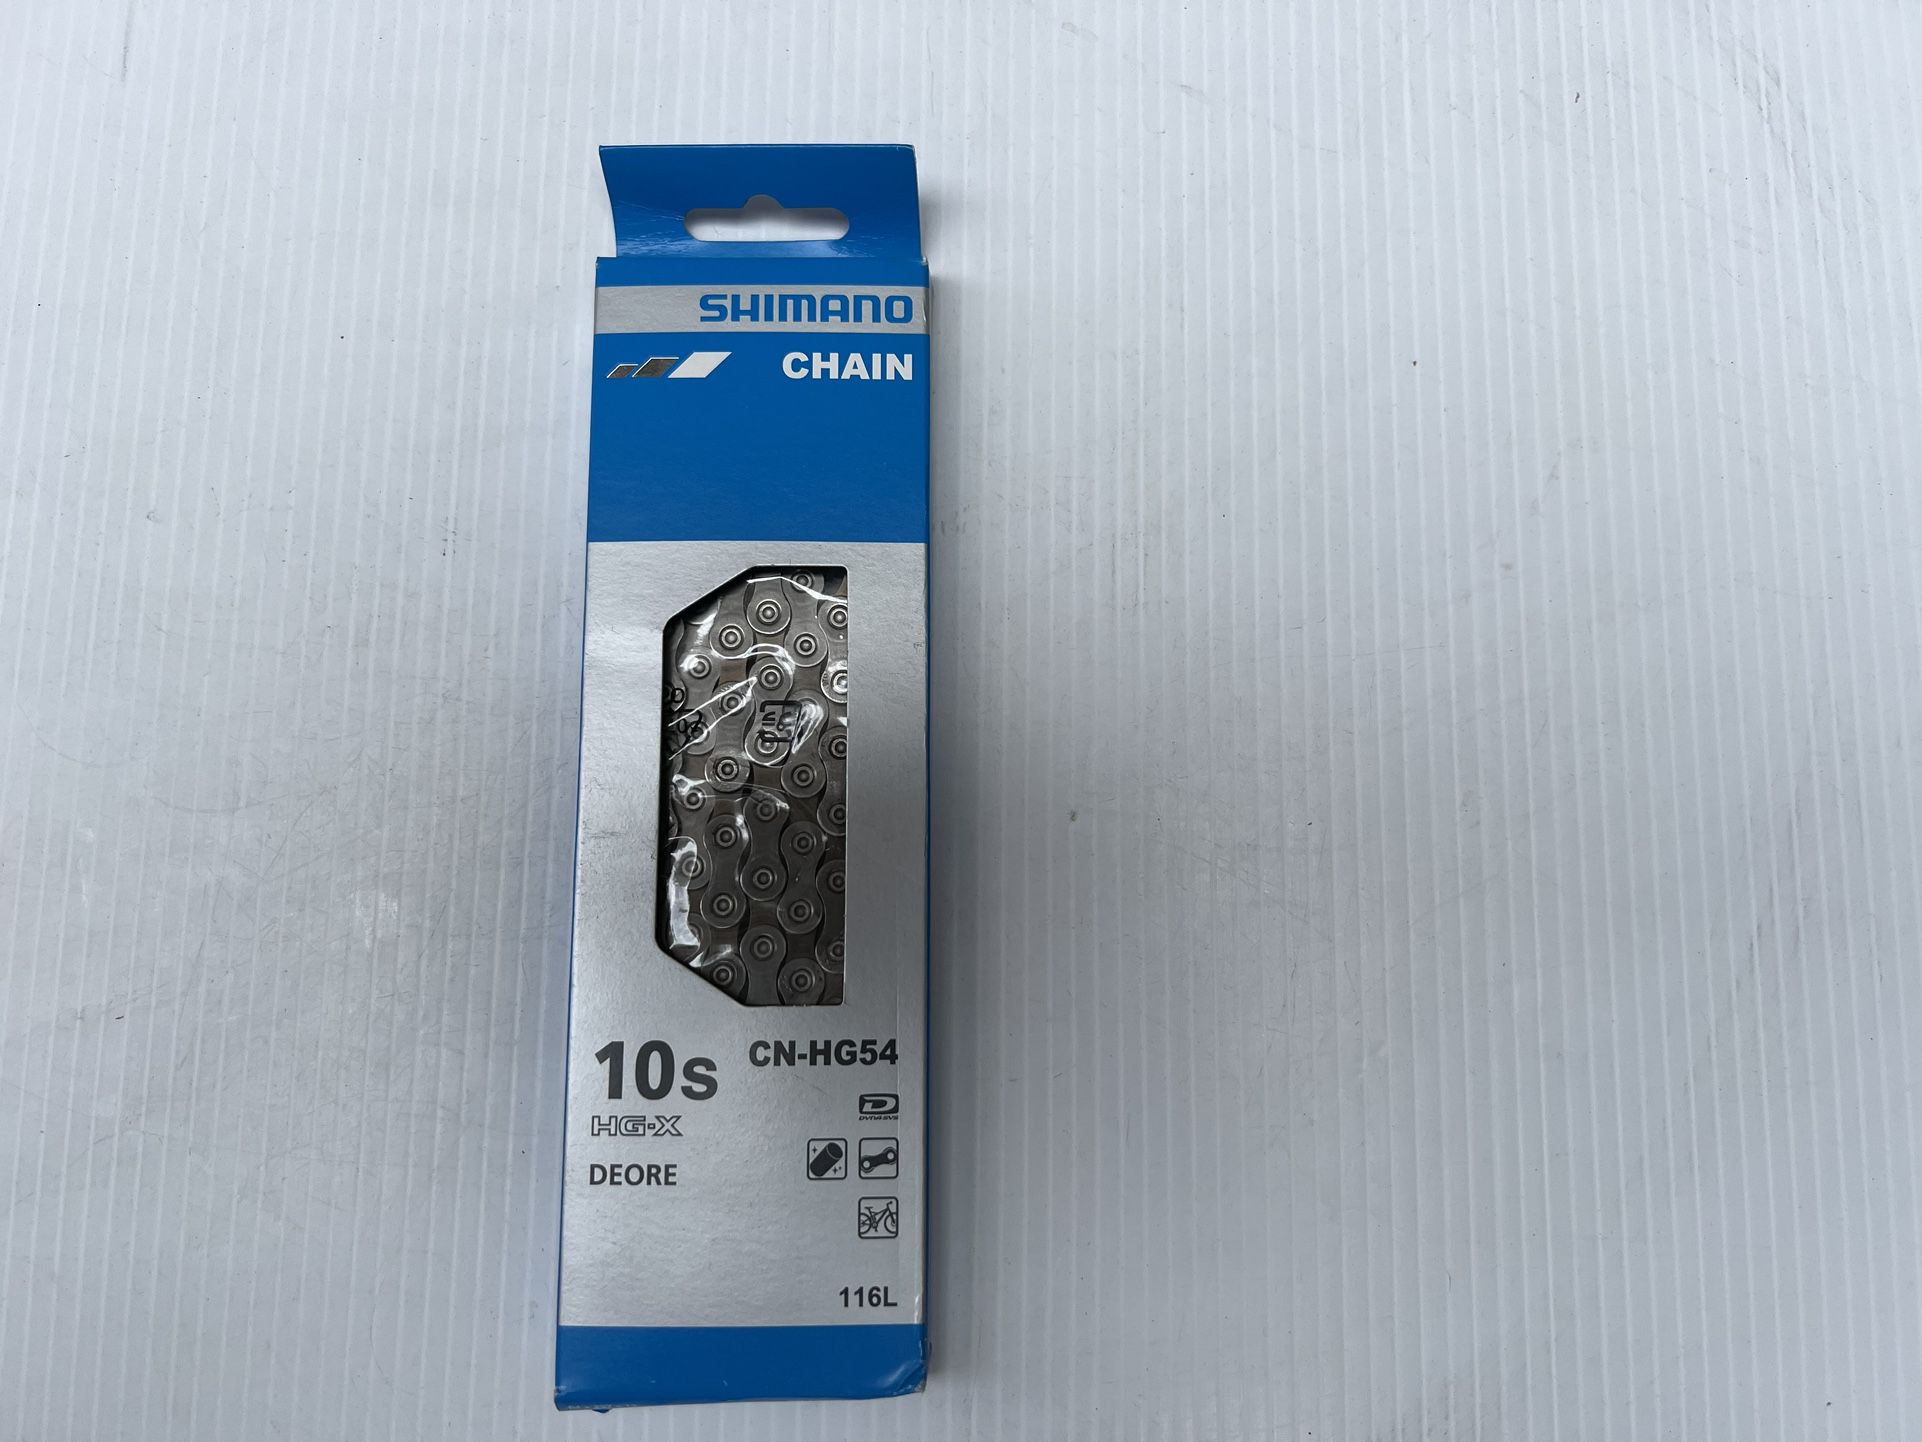 Shimano Deore Hg-54 10 Speed Chain New!